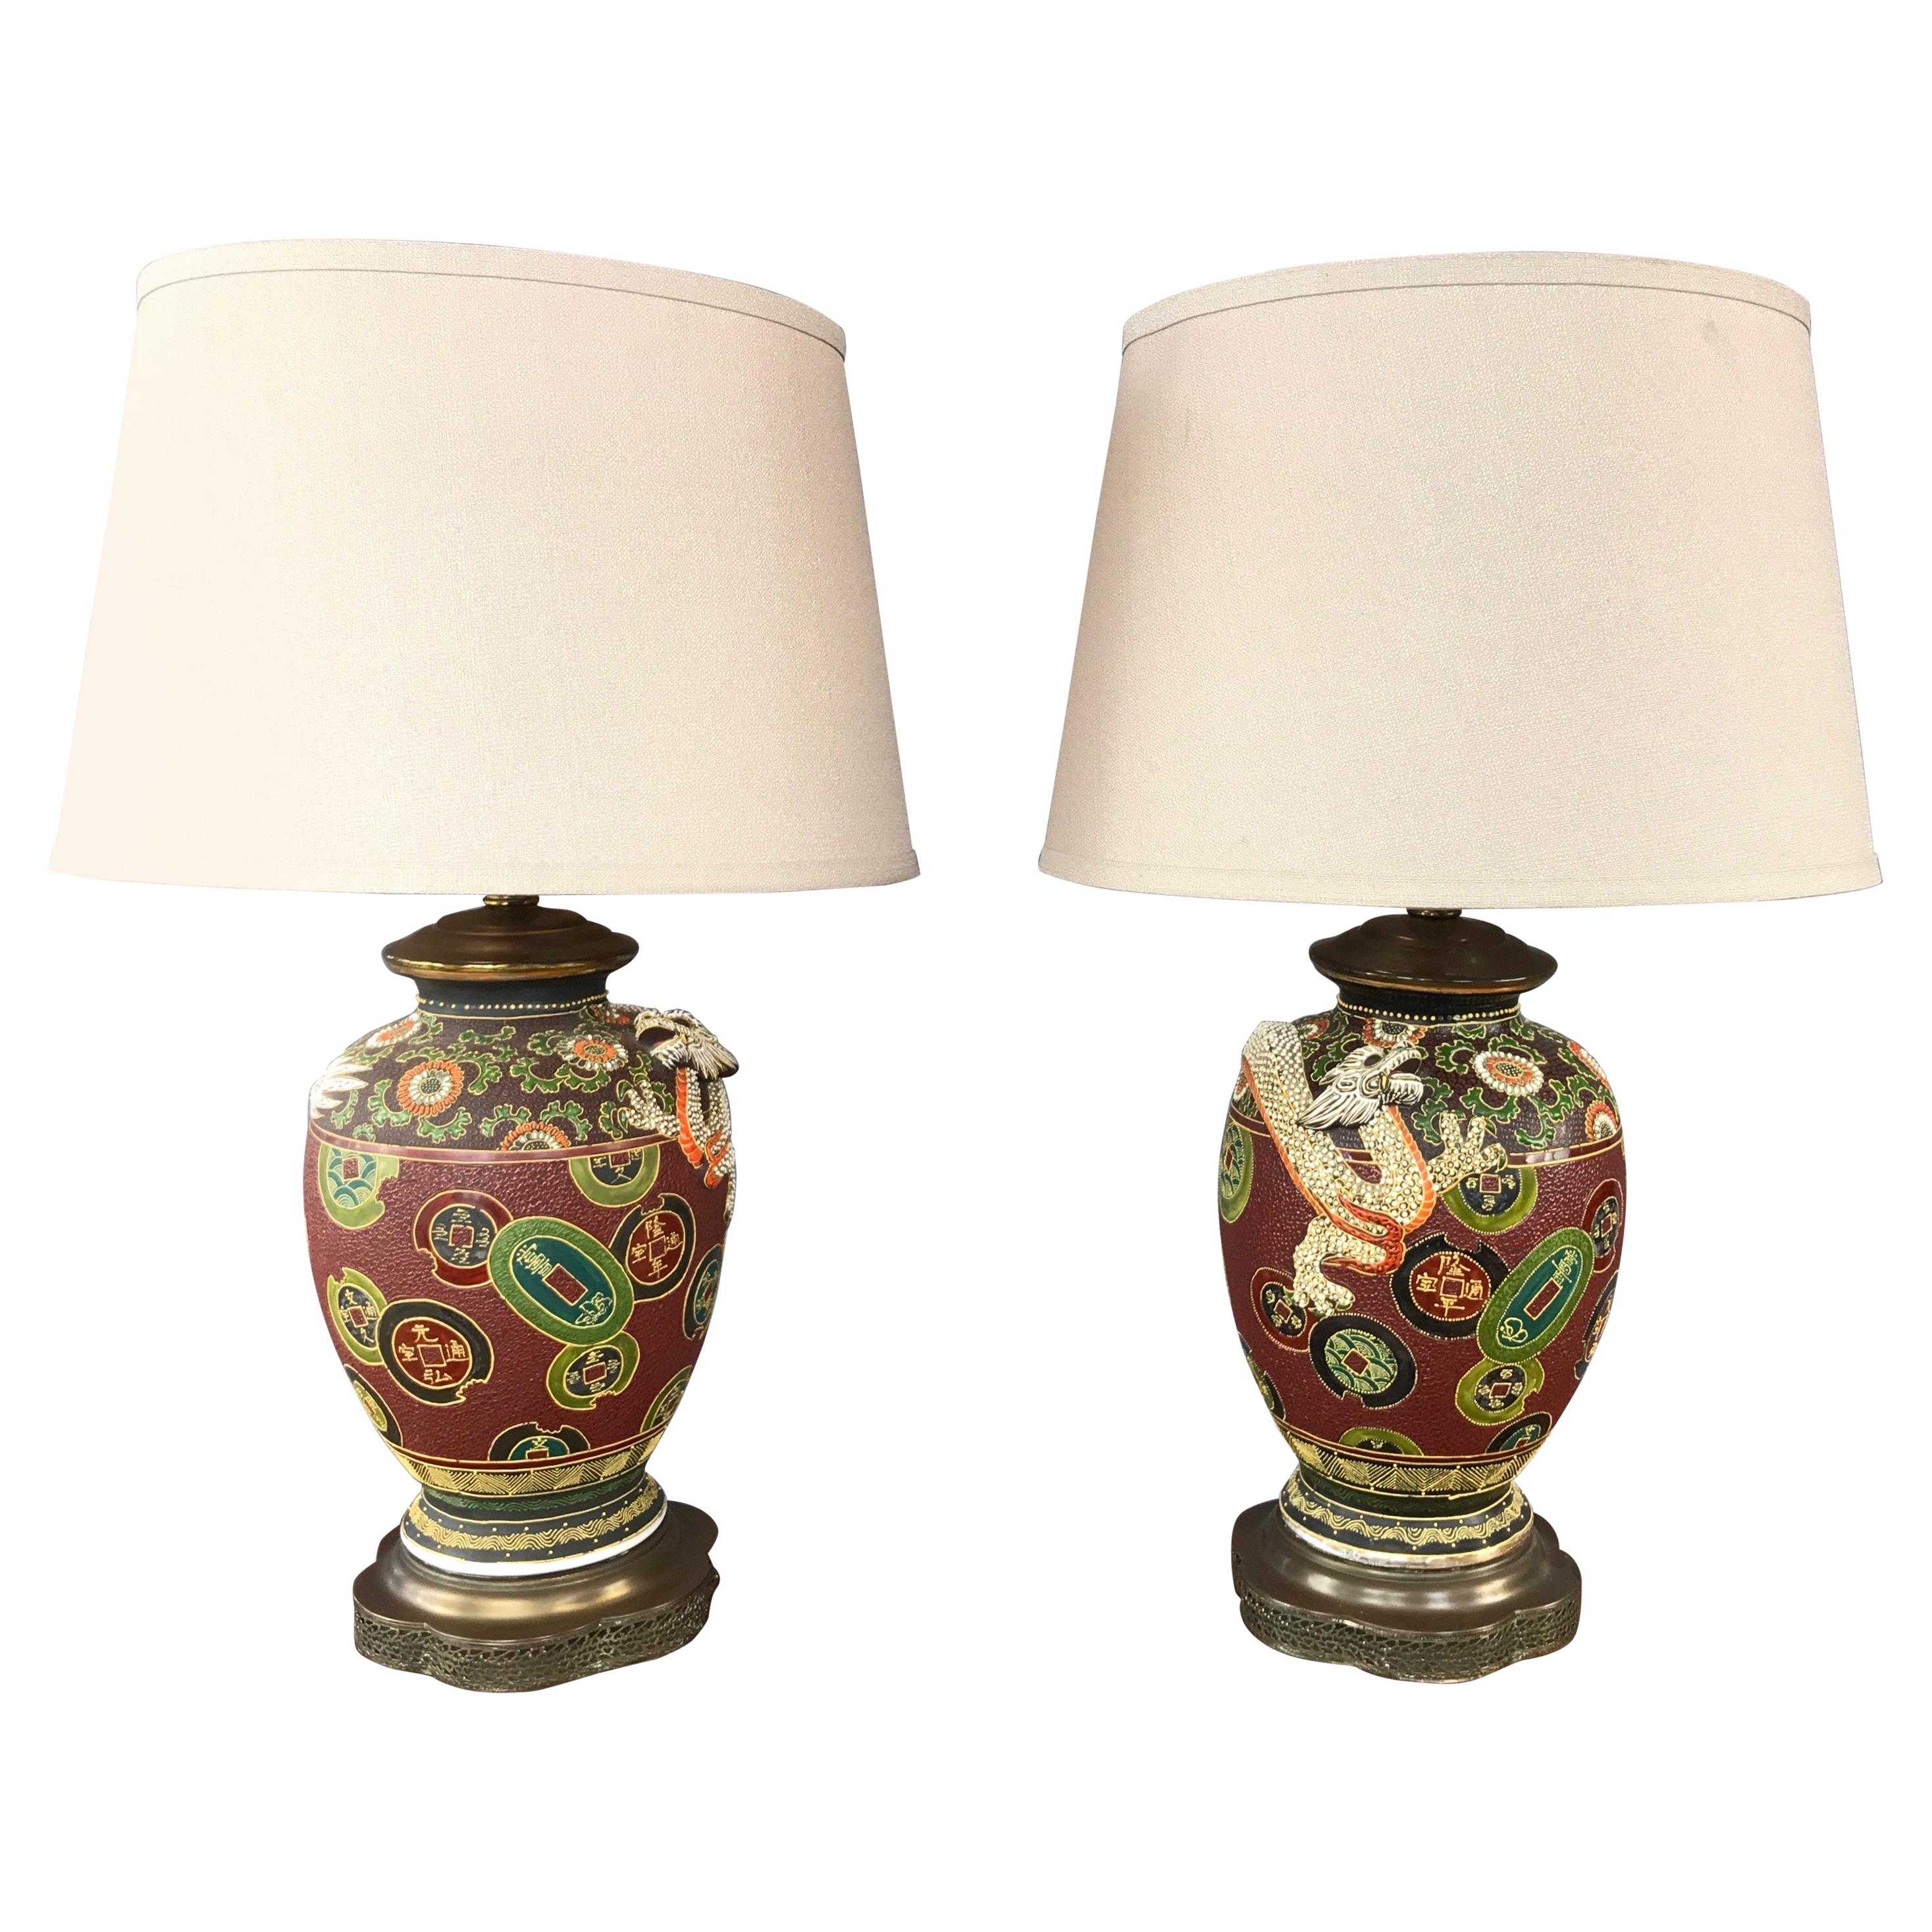 Pair of Asian Dragon and Charm Motif Hand-Decorated Ceramic Table Lamps